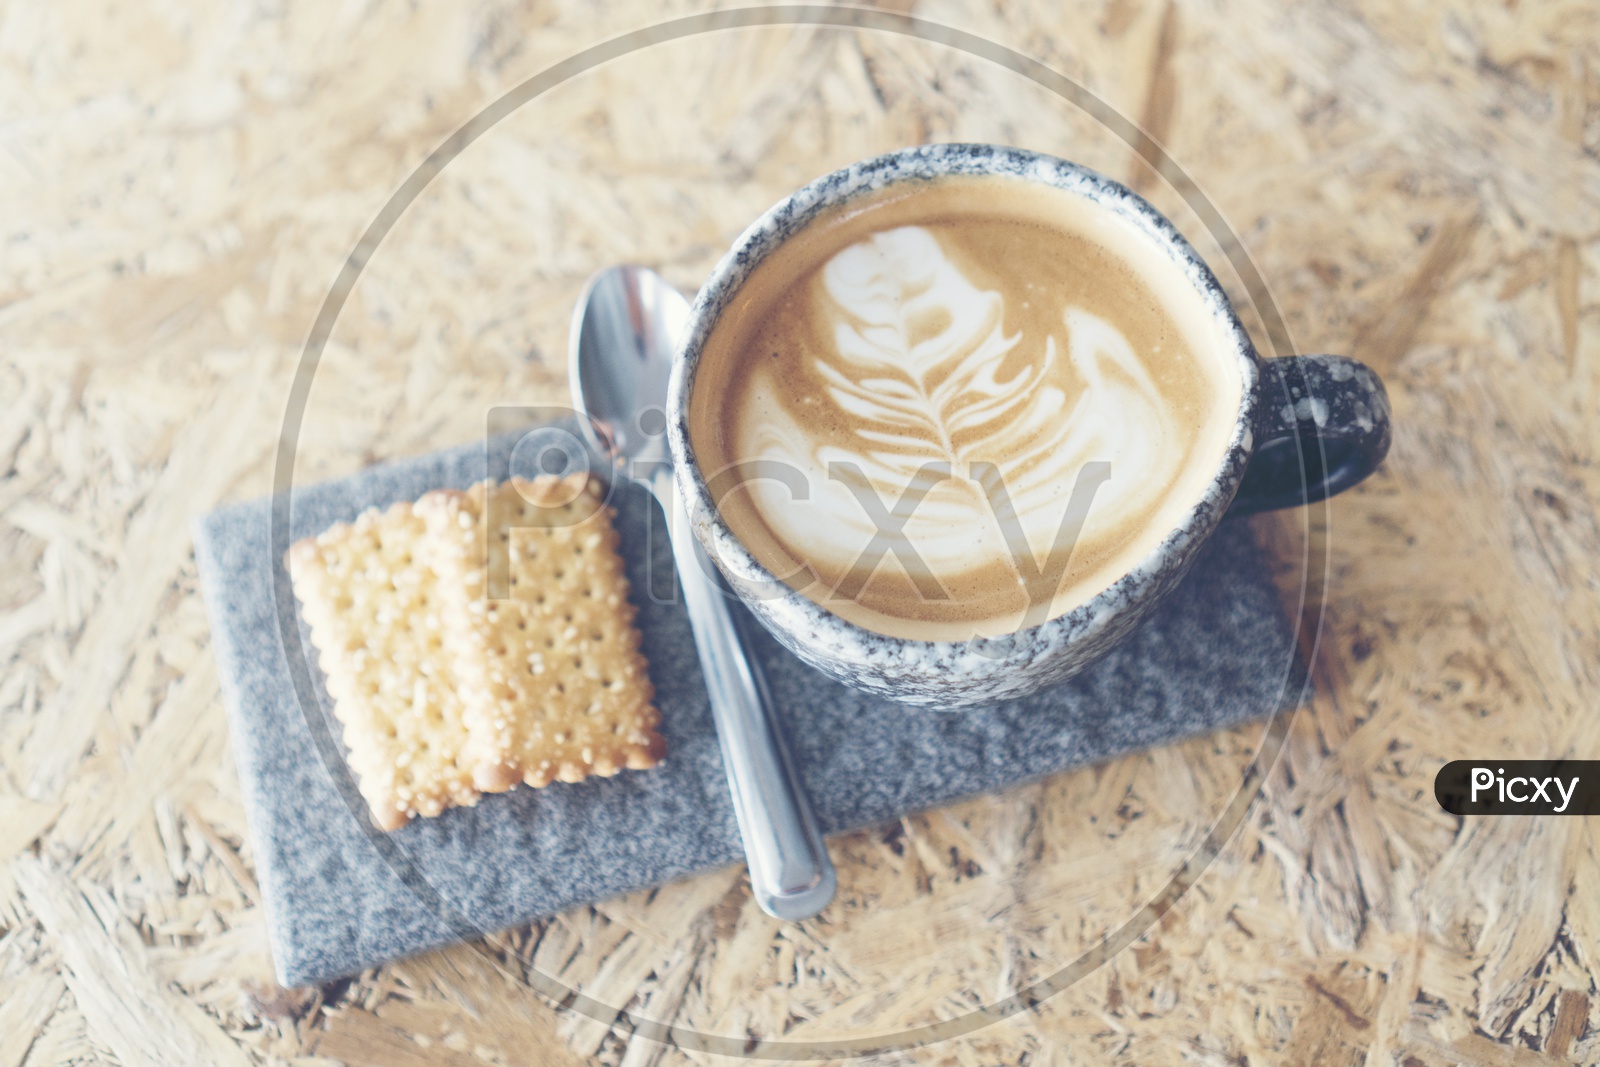 coffee latte art On Coffee Cup Served With Sugar Coated Coconut Biscuits